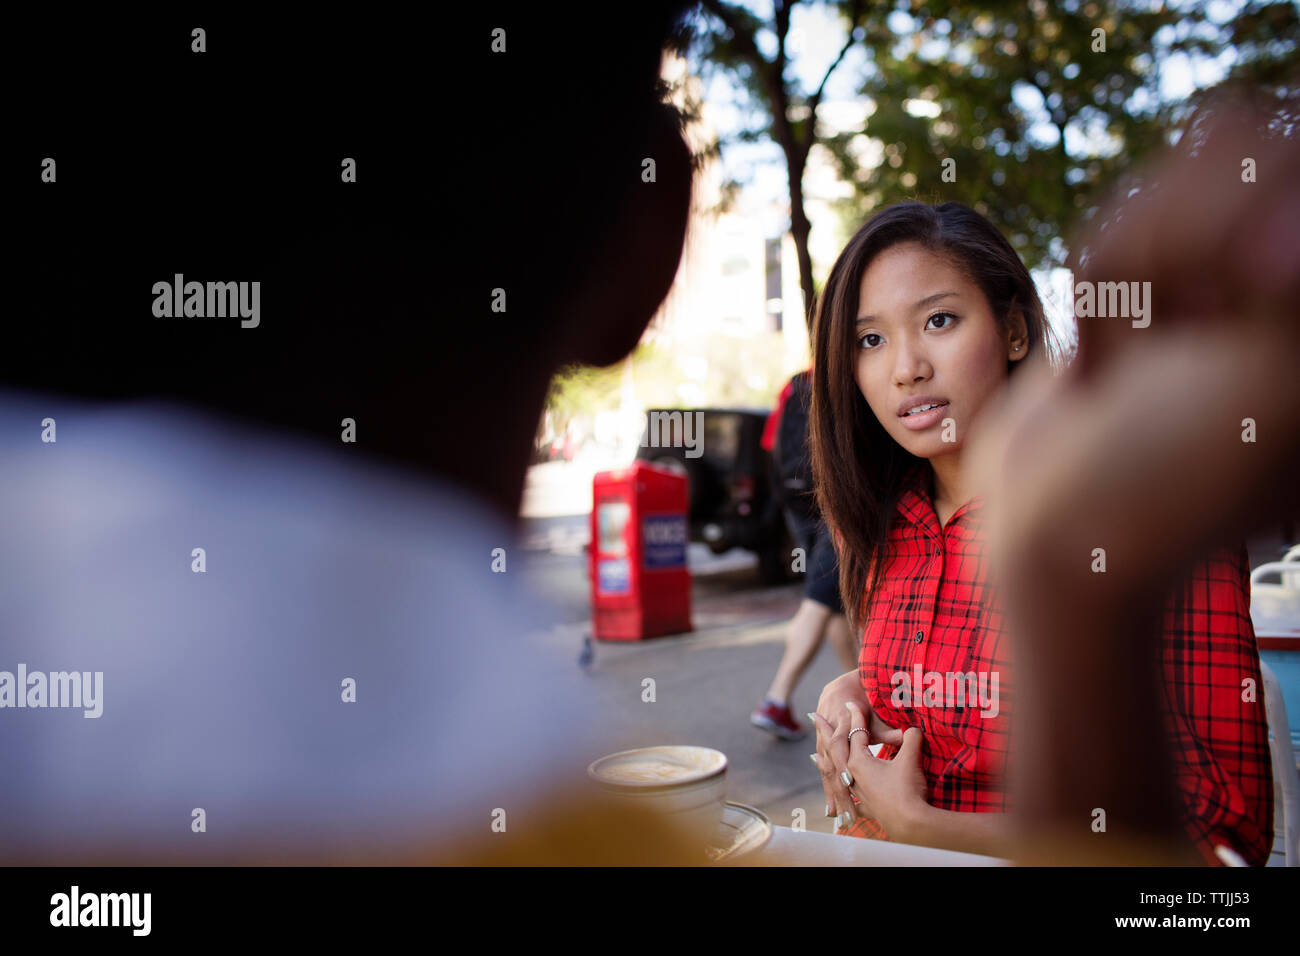 Woman looking at friend while sitting in sidewalk cafe Stock Photo